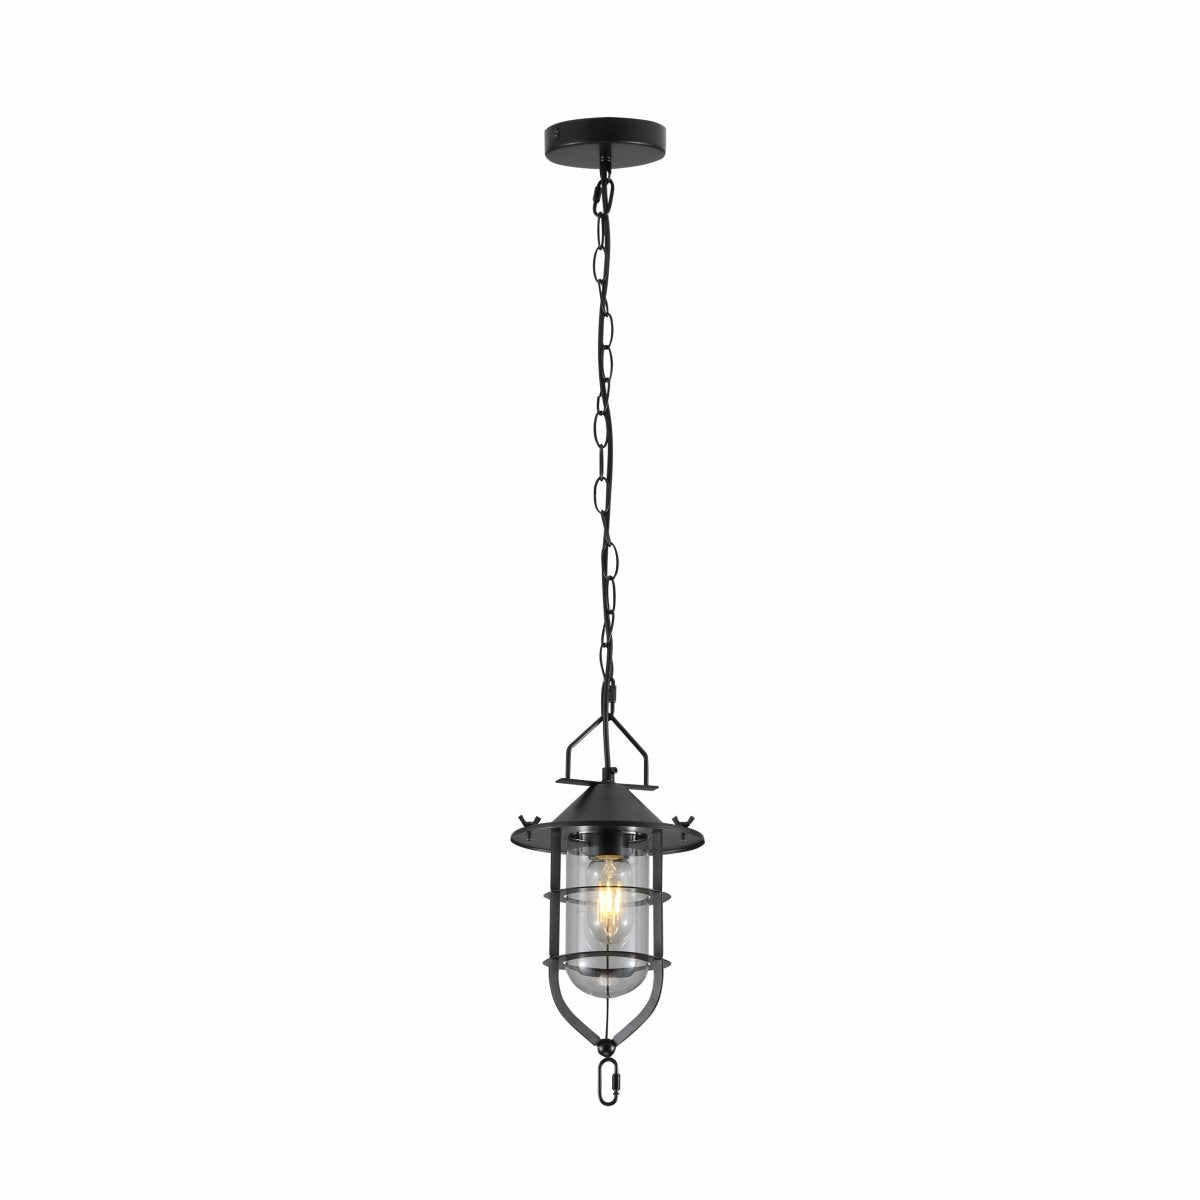 Main image of Black Nautical Industrial Caged Flat Shade Small Glass Metal Ceiling Pendant Light with E27 Fitting  | TEKLED 150-18370